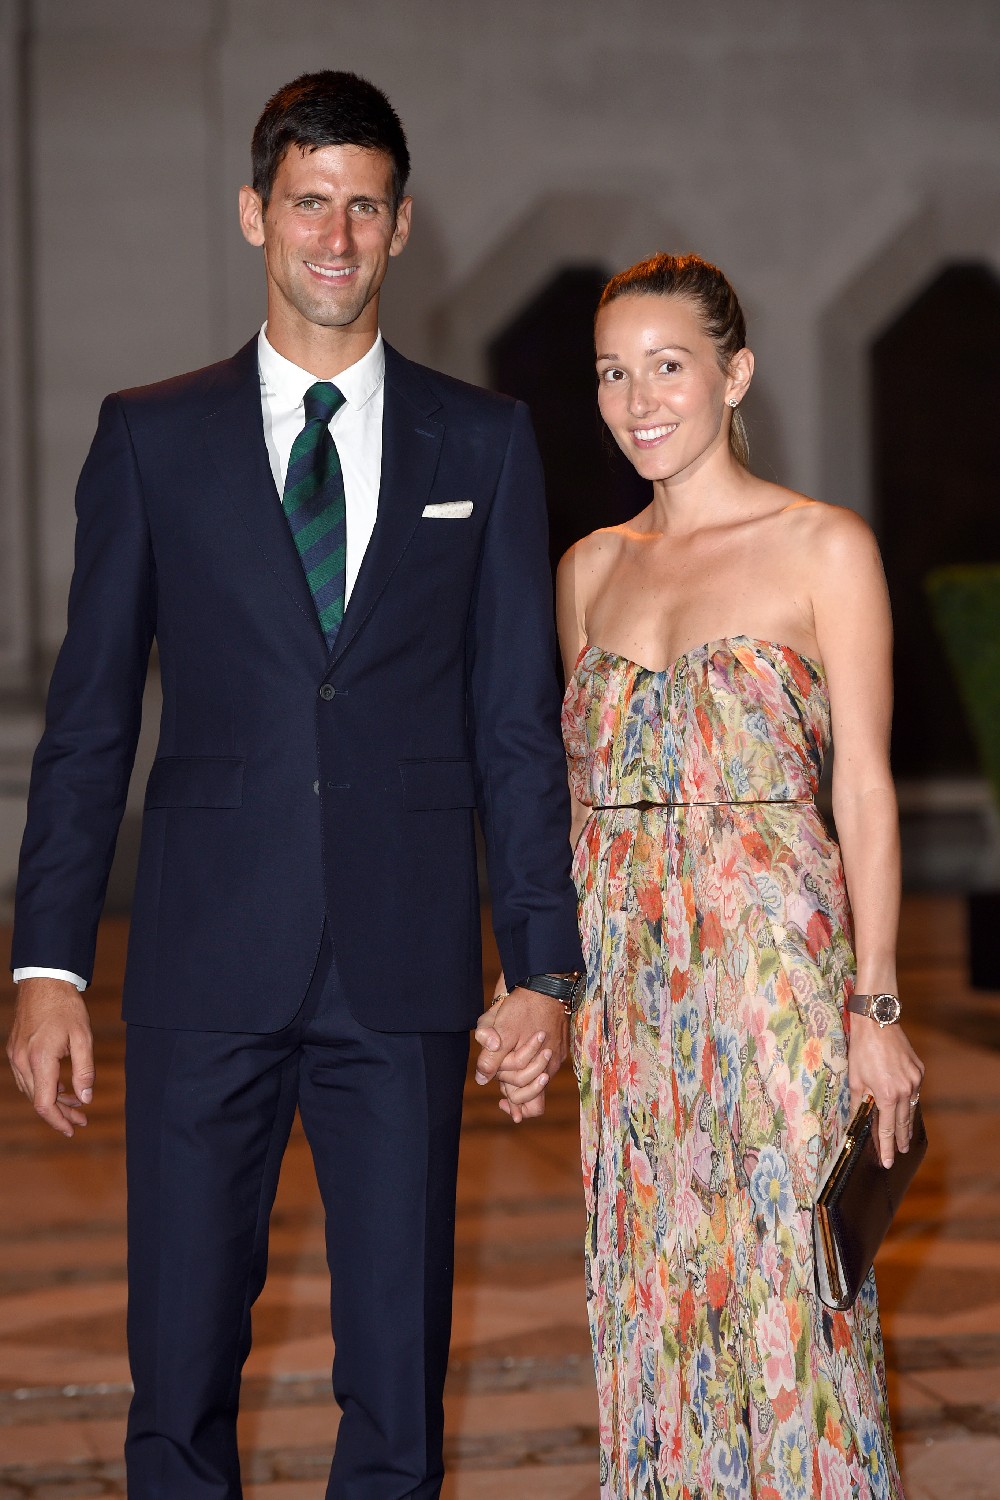 Novak and Jelena Djokovic, who have been toegther since the mid-2000s.